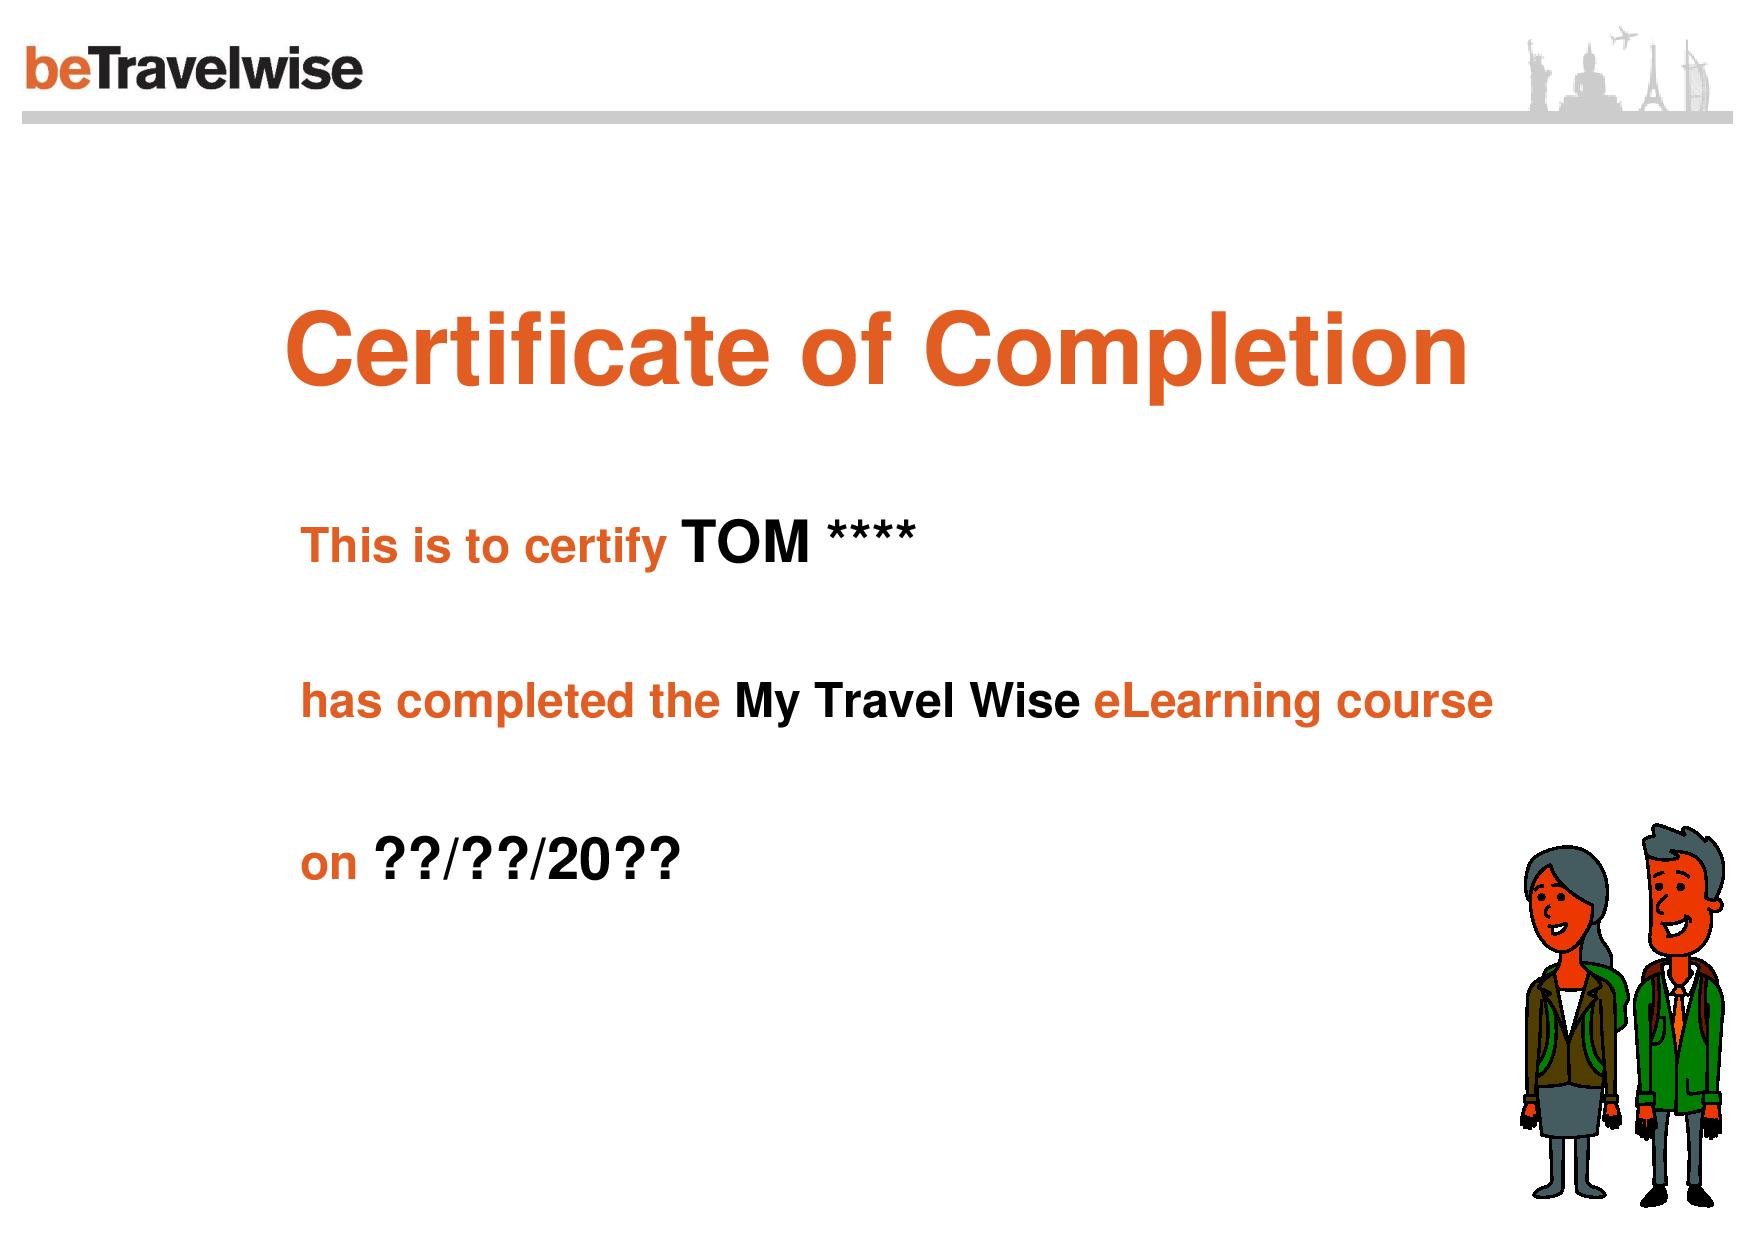 my-travel-wise-elearning-certificate_october-2016-page-001